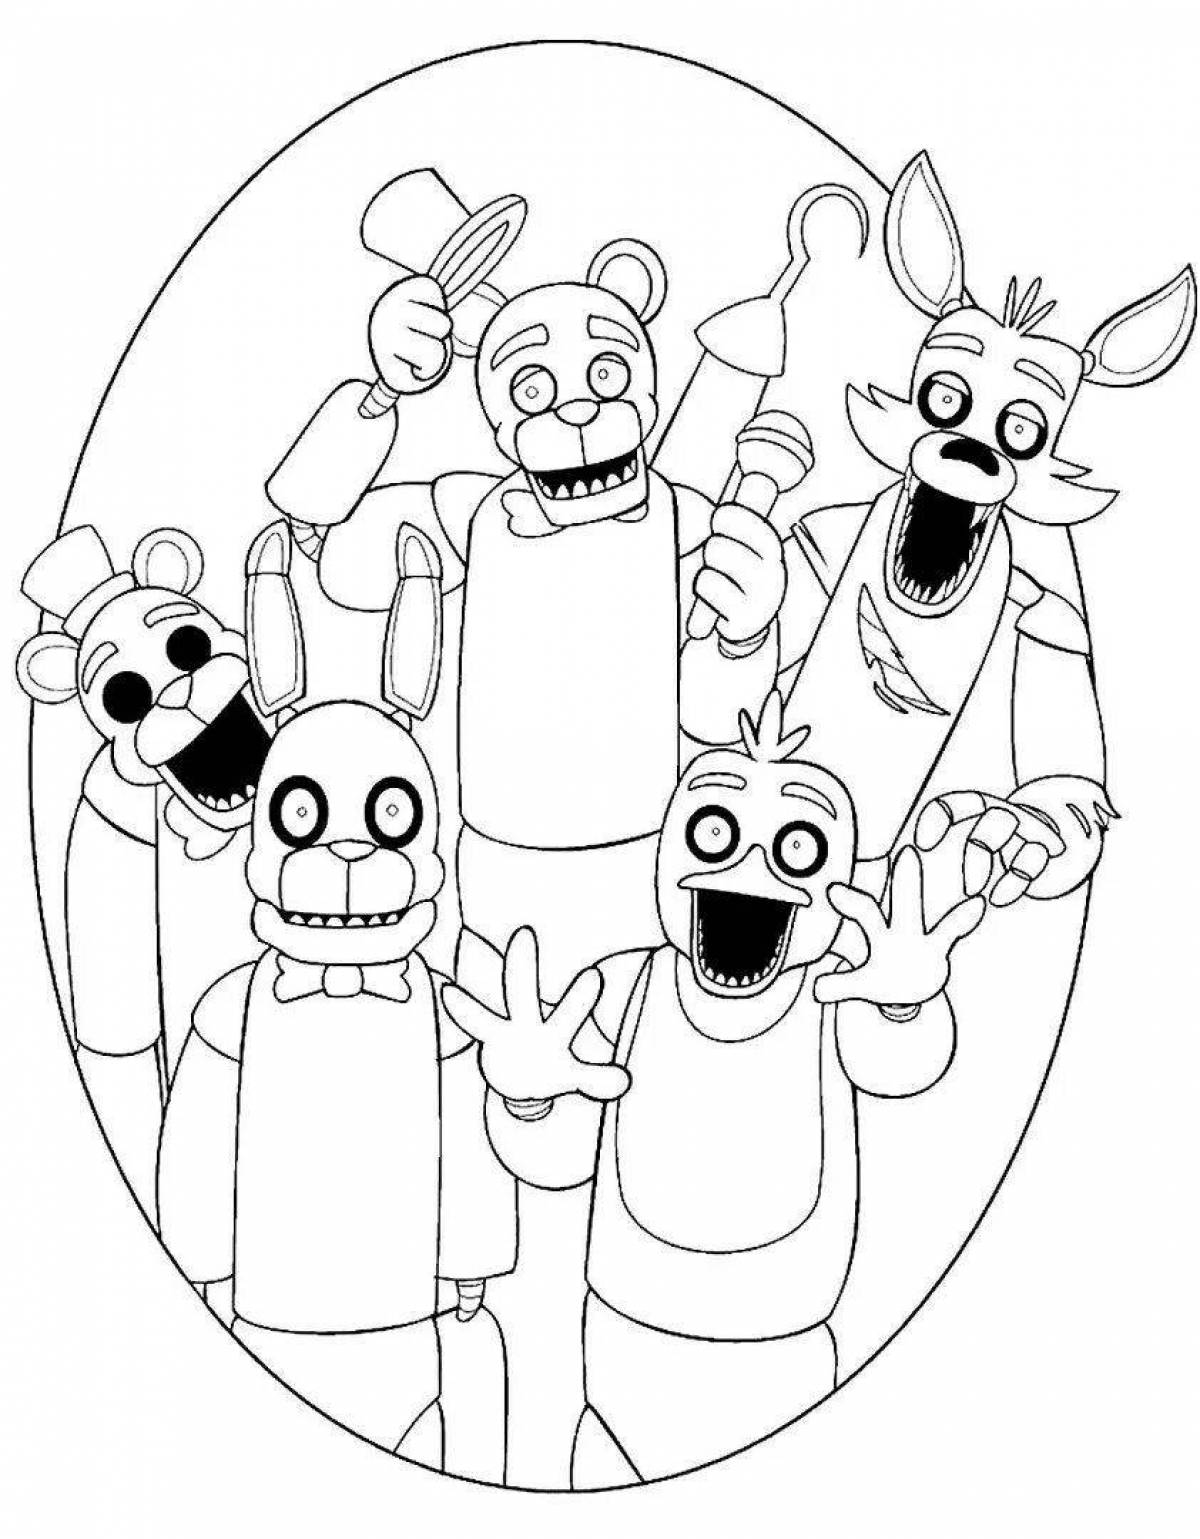 Animated fnaf 5 coloring book